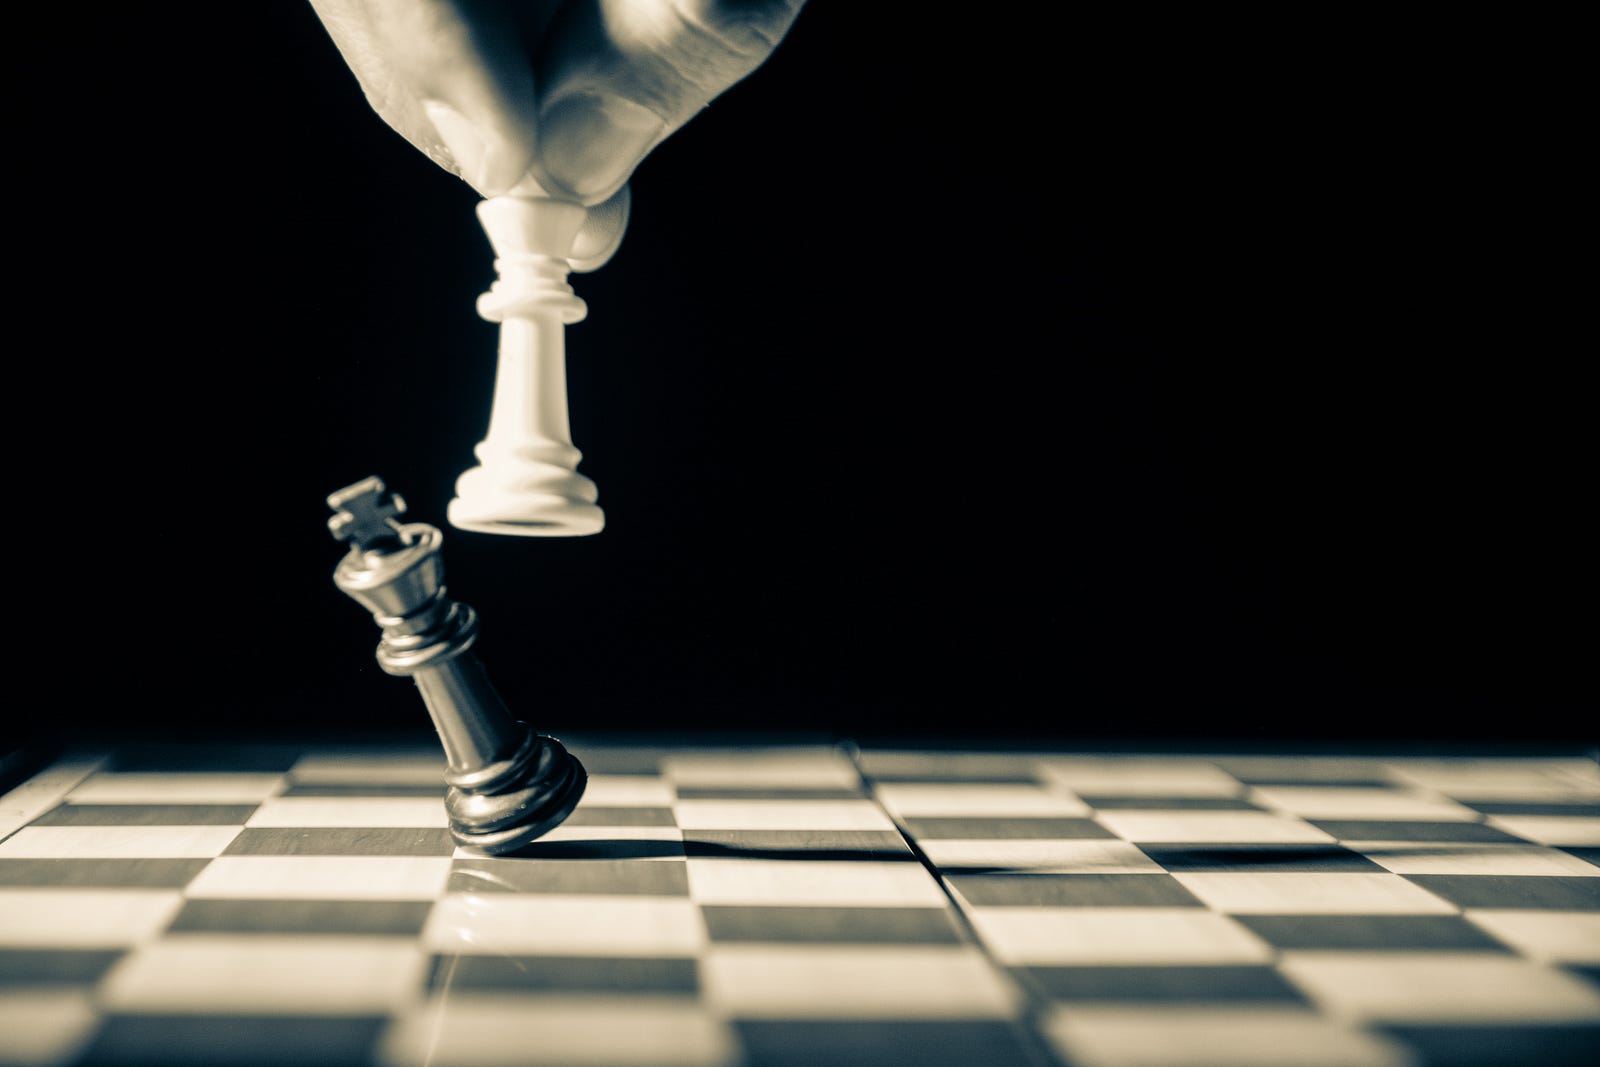 A chess piece (white Queen) knocks over a black Rook. No other pieces are seen on the board. I noticed that Dr. Douglas Rex, present at the Suflave announcement press conference receives funding support from Sebela, the company that makes Suflave.